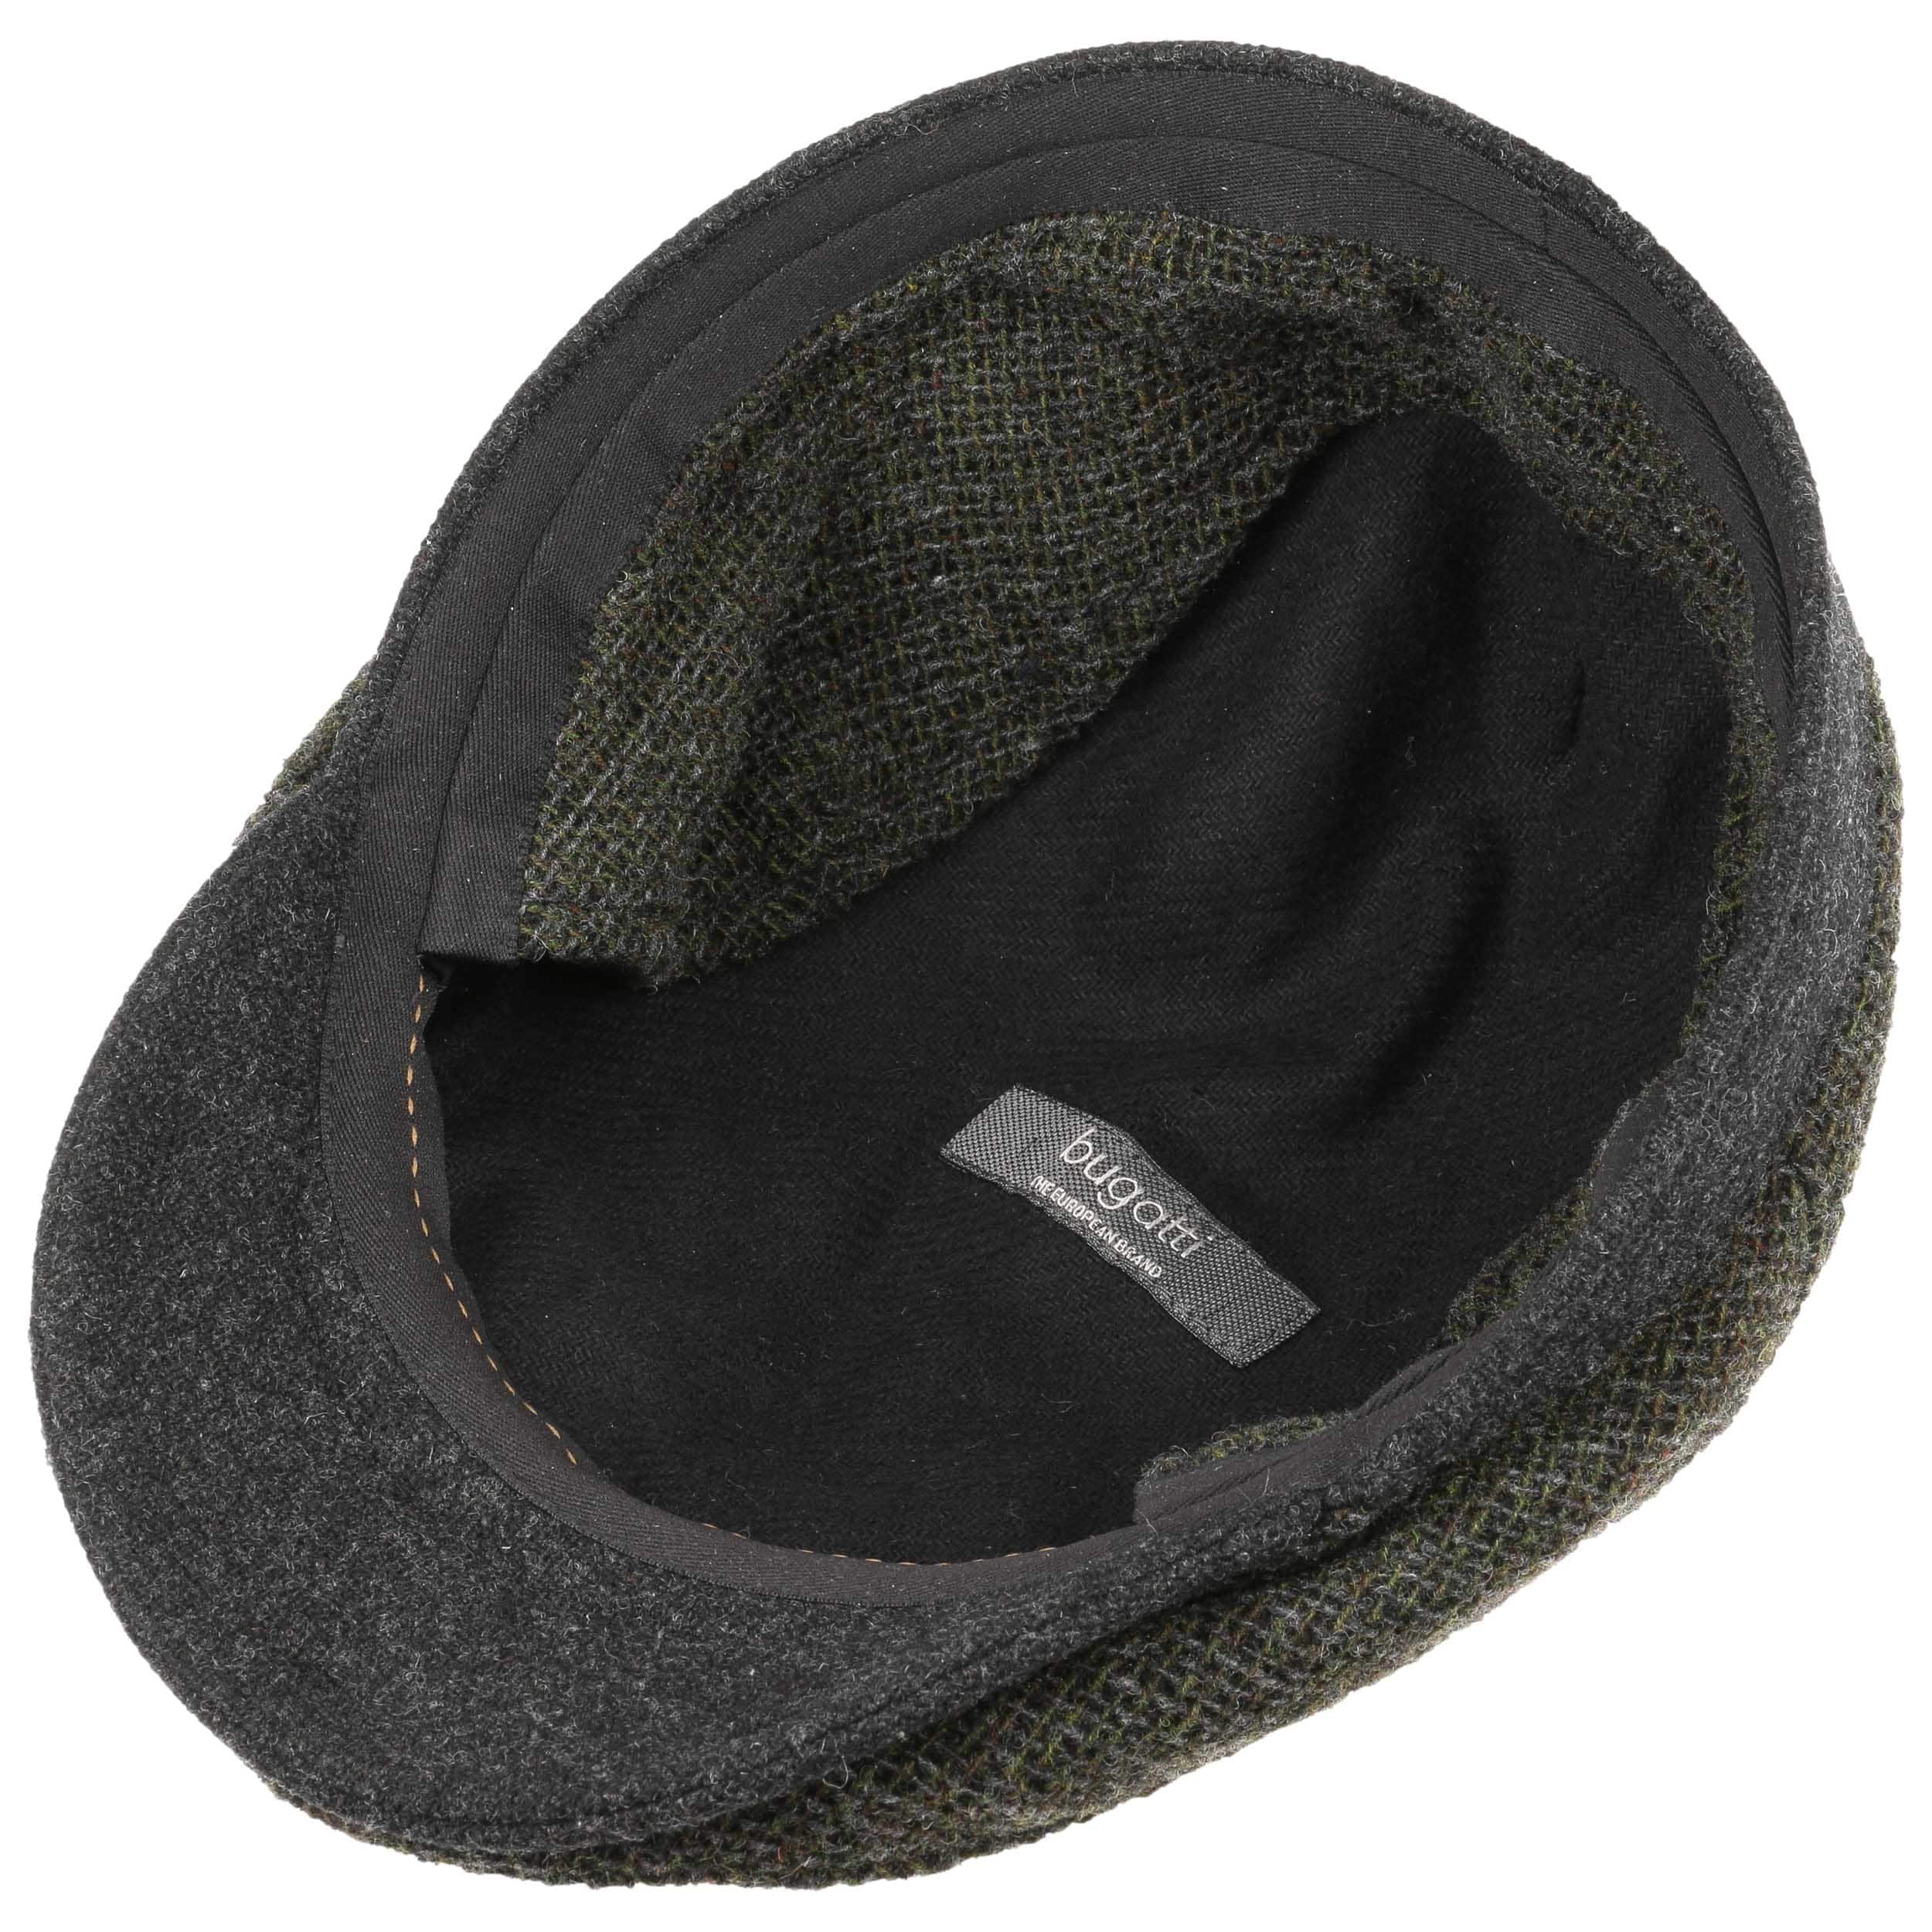 wool flat cap with ear flaps